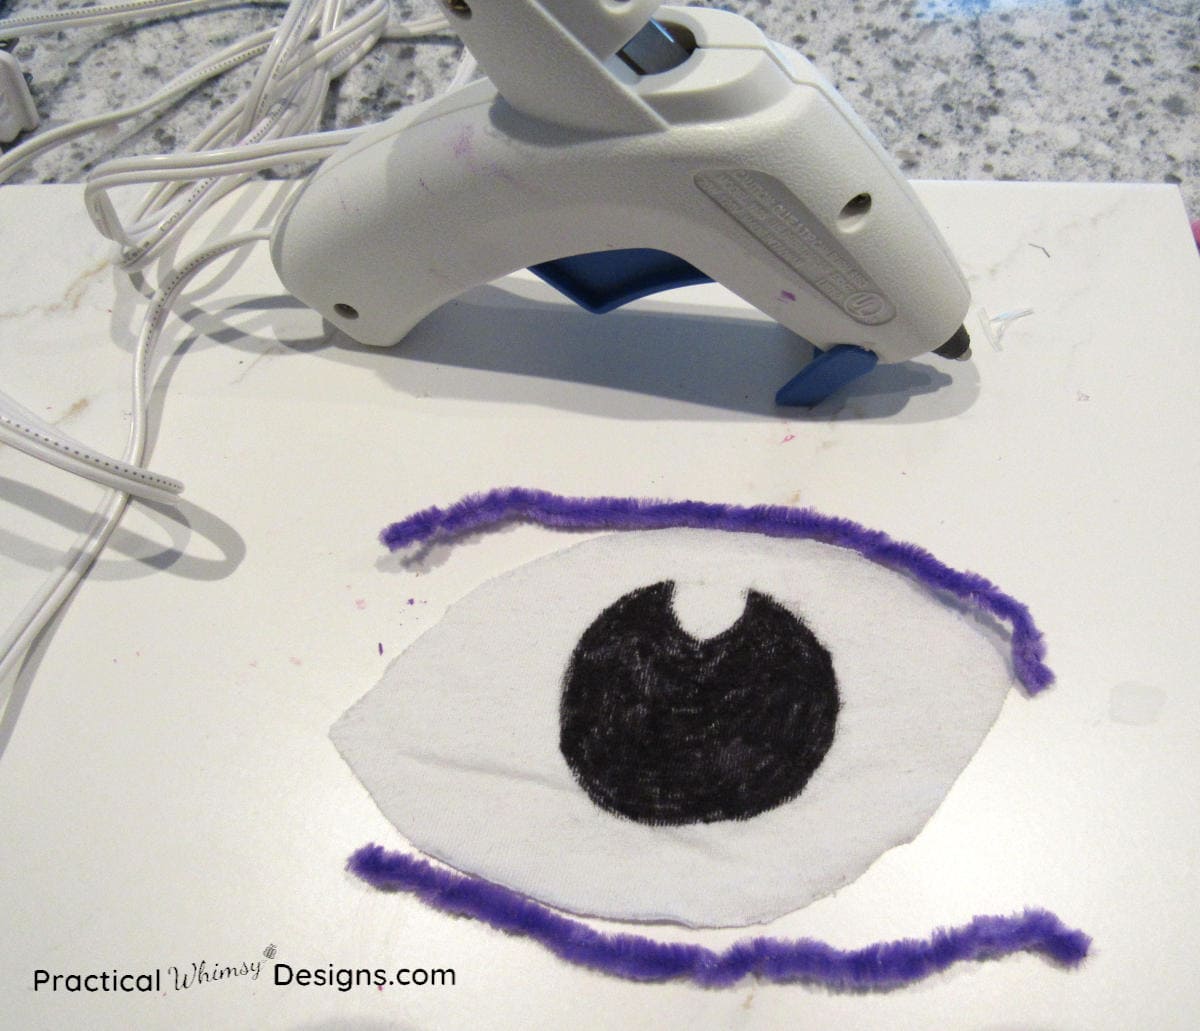 Gluing pipe cleaners on fabric eye with hot glue gun